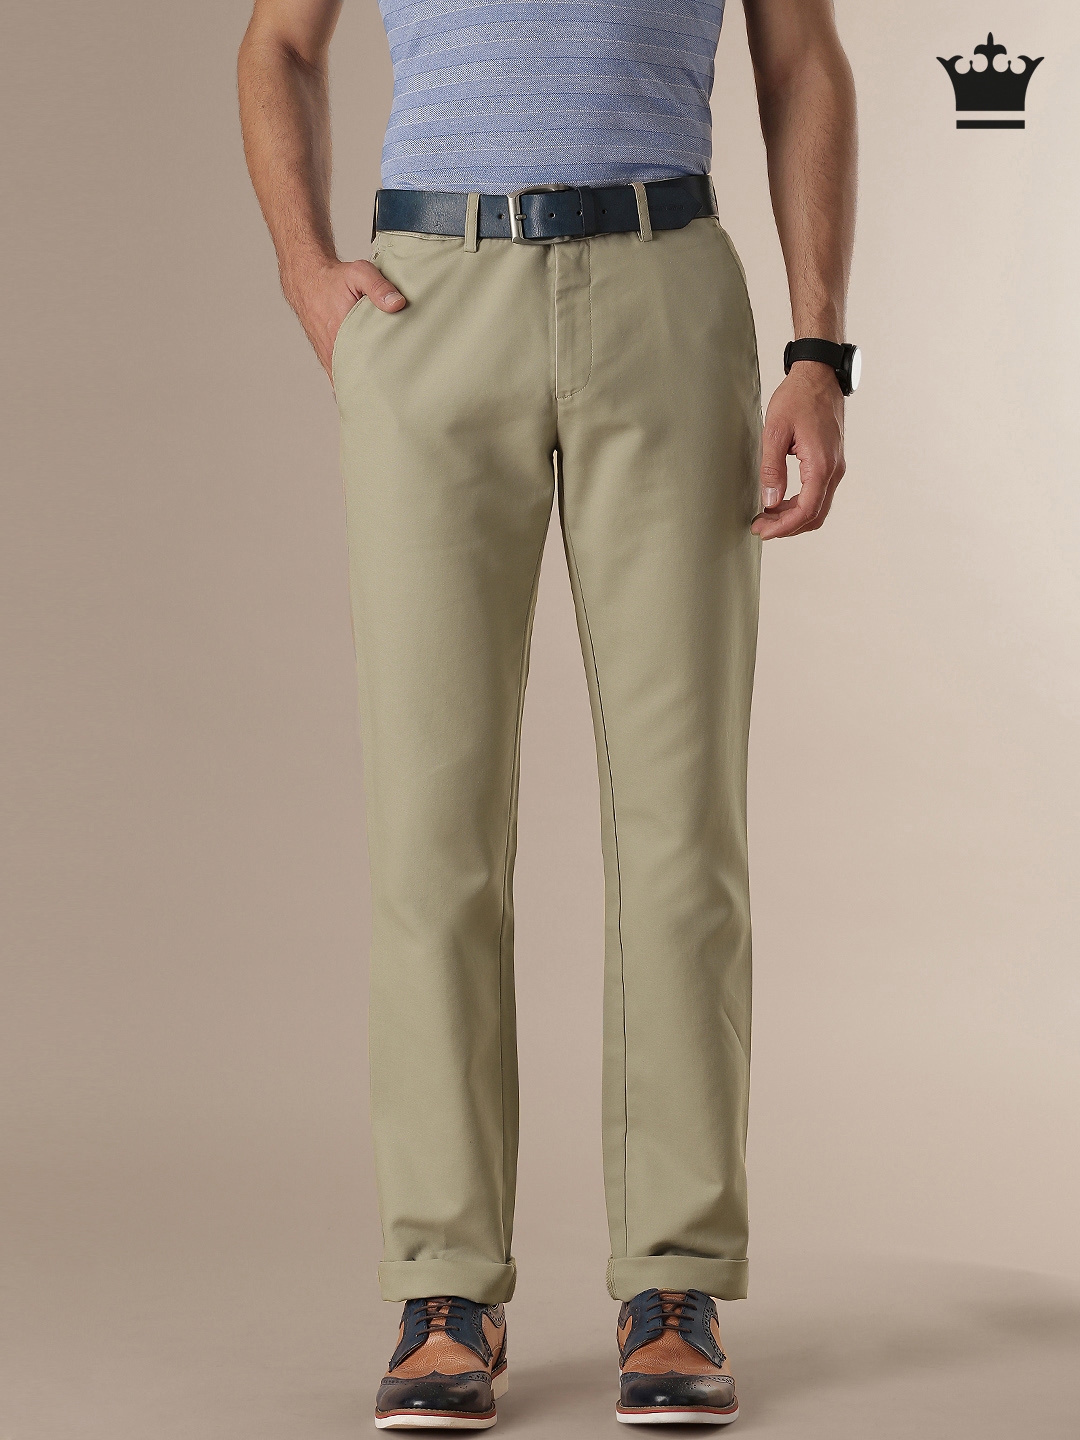 Latest Louis Philippe Relaxed fit trousers arrivals  Men  4 products   FASHIOLAin